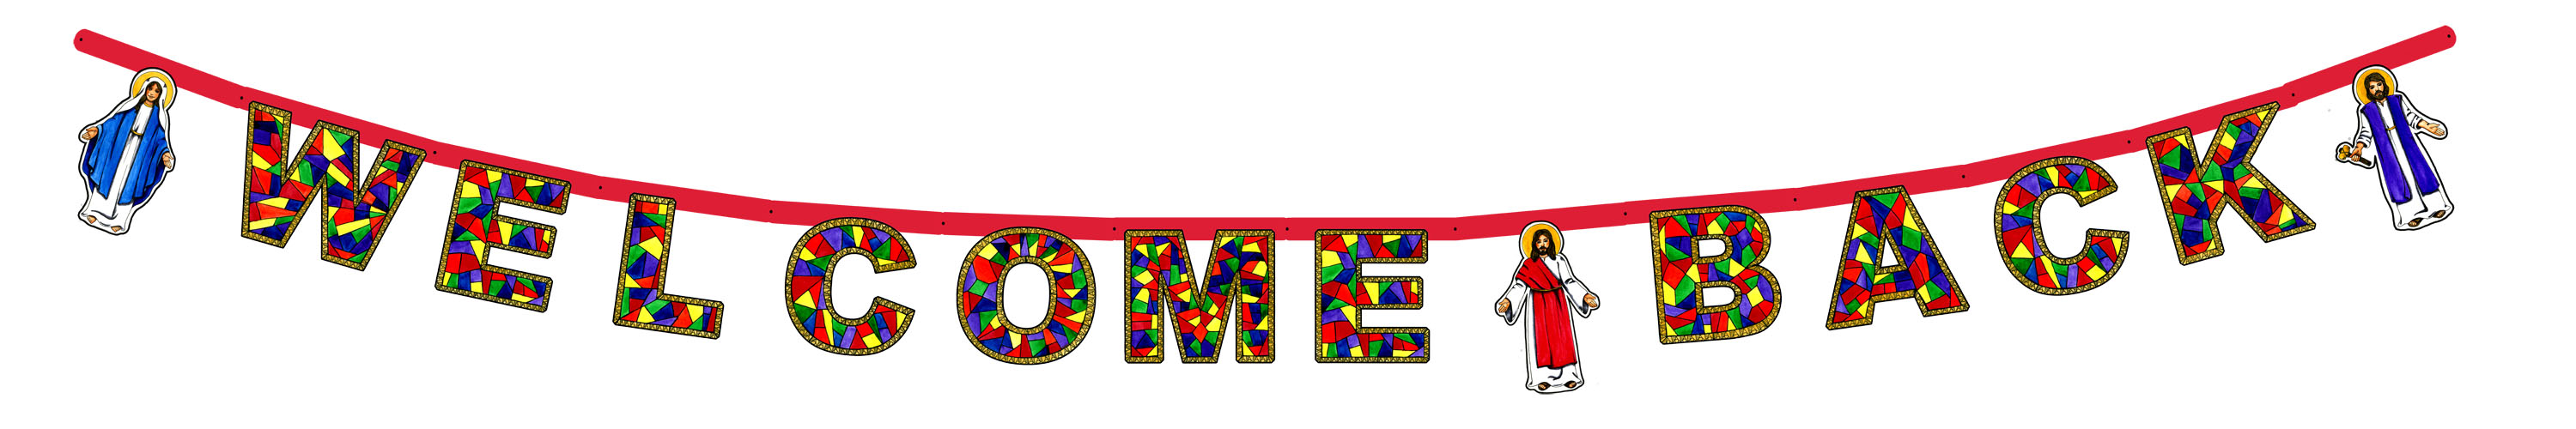 Free welcome graphics welcome clip art - Cliparting.com